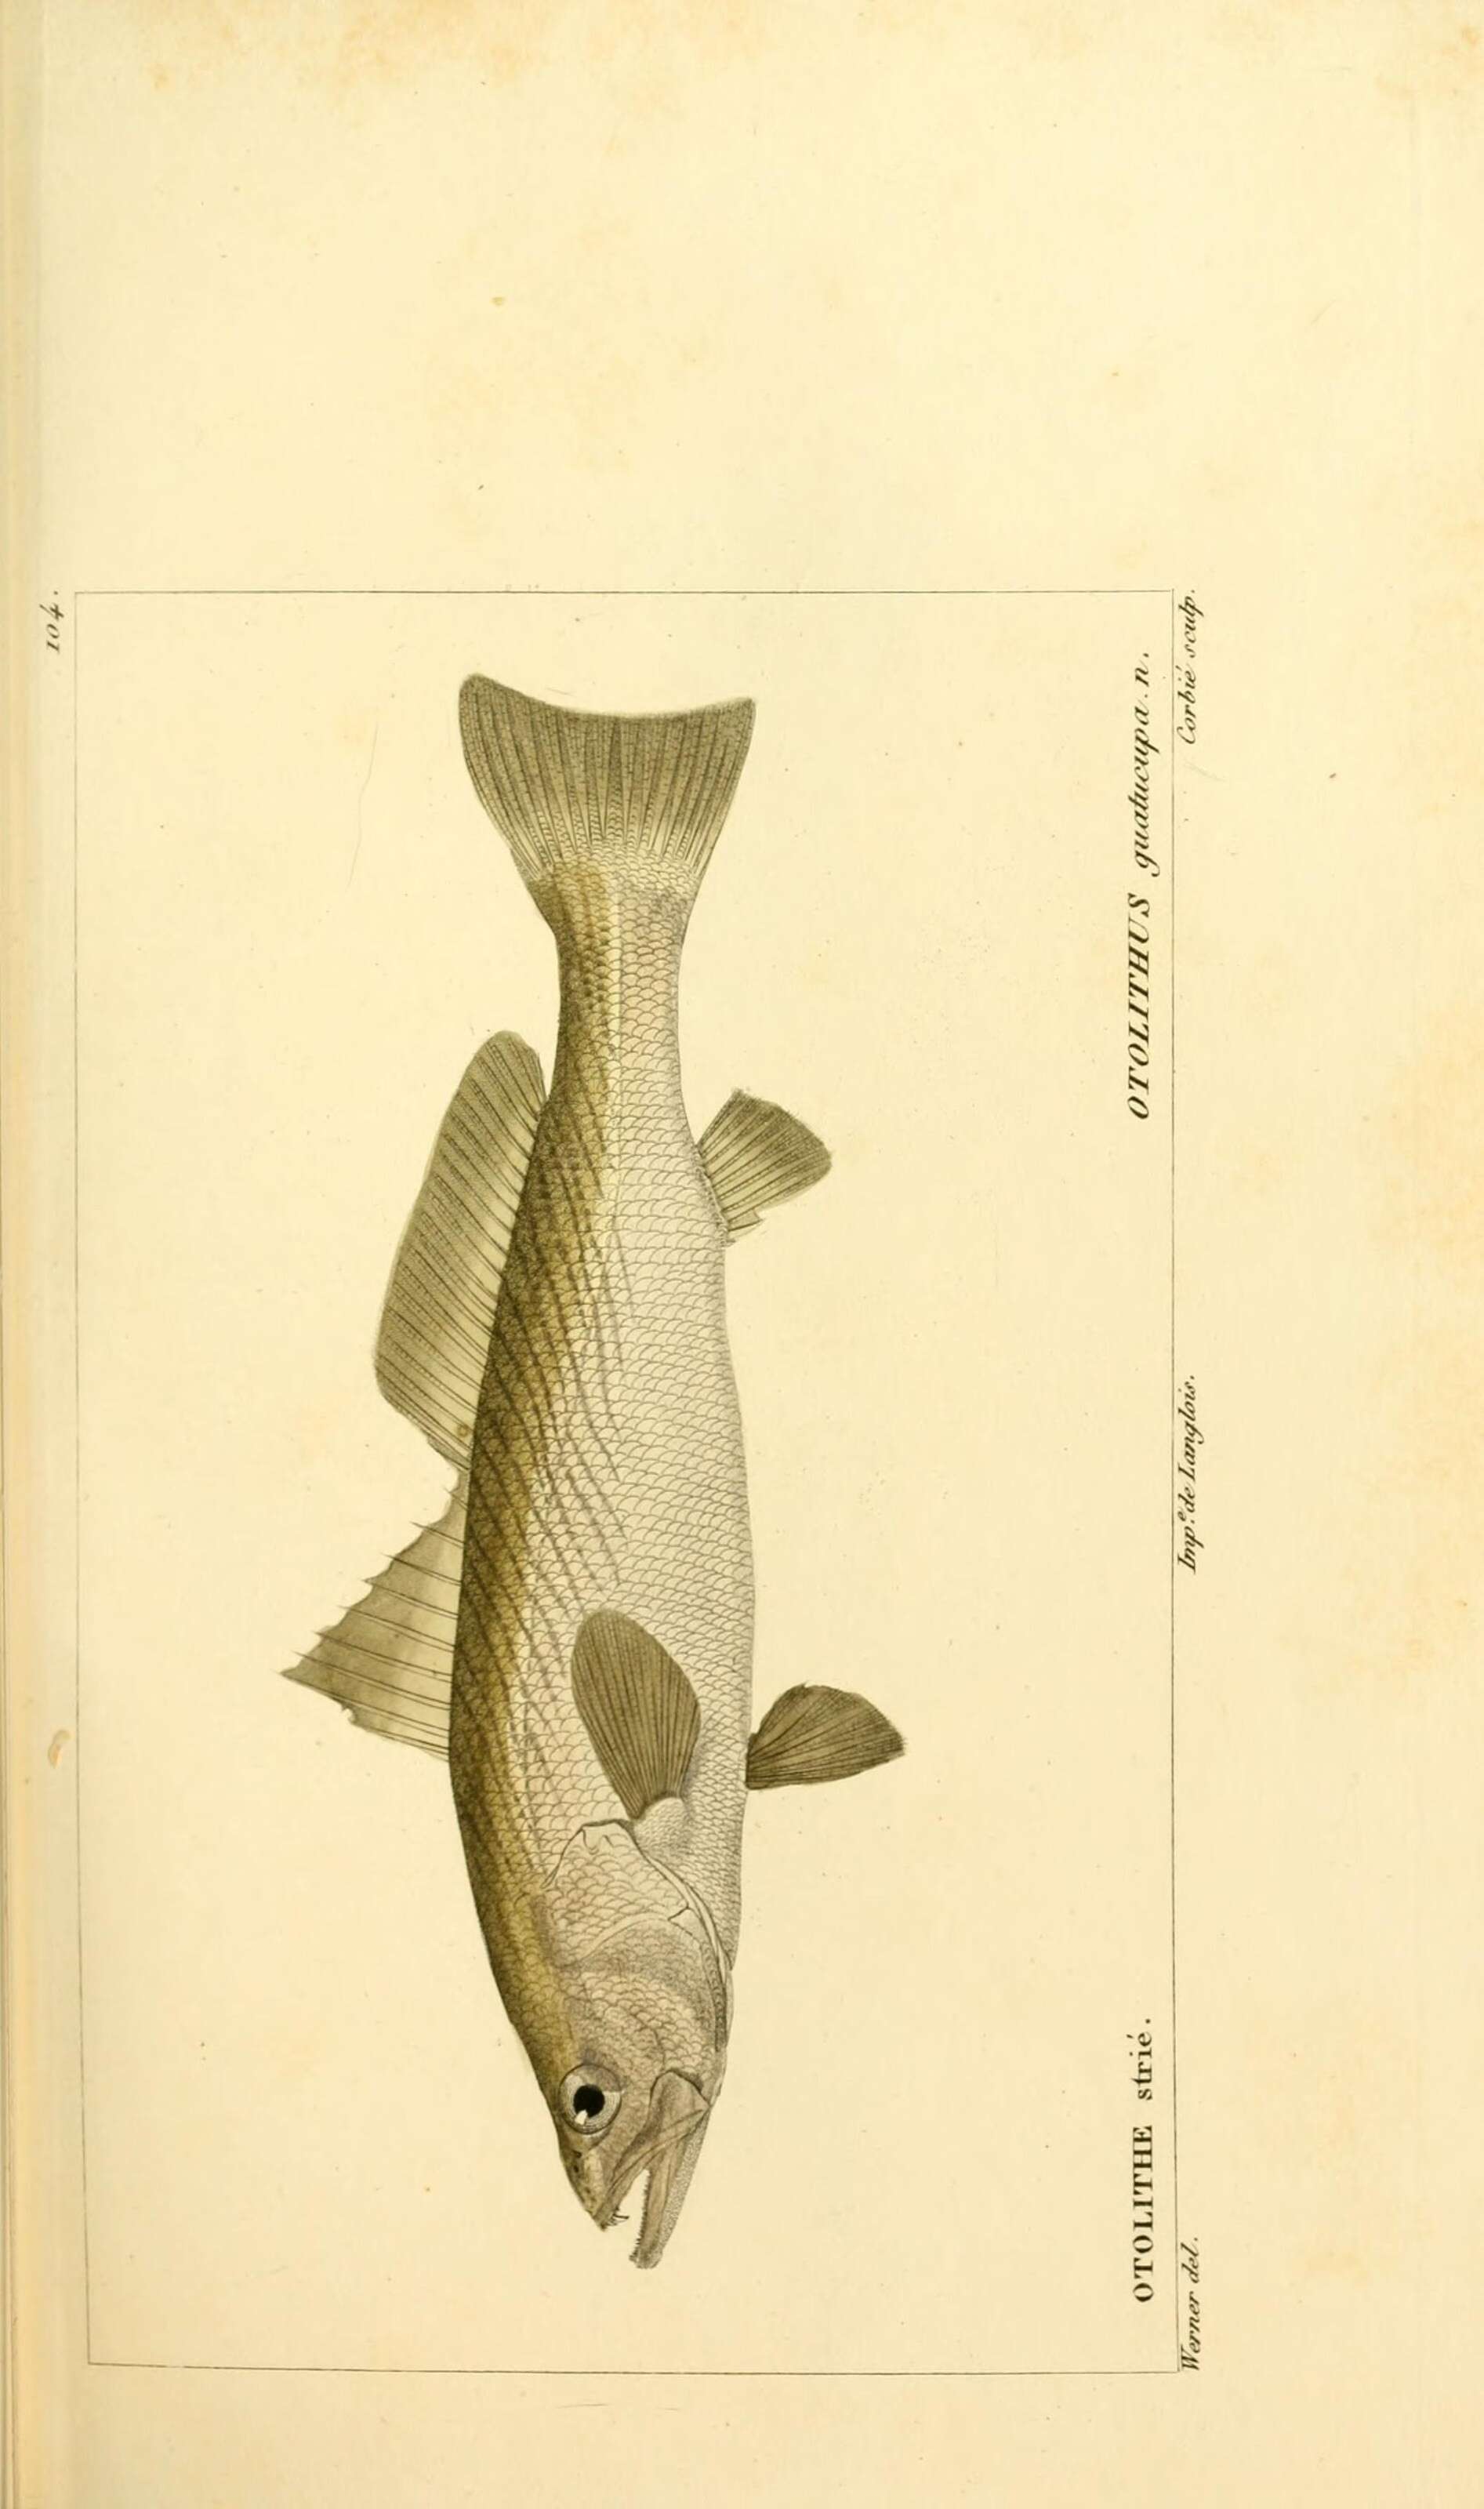 Image of Stripped weakfish